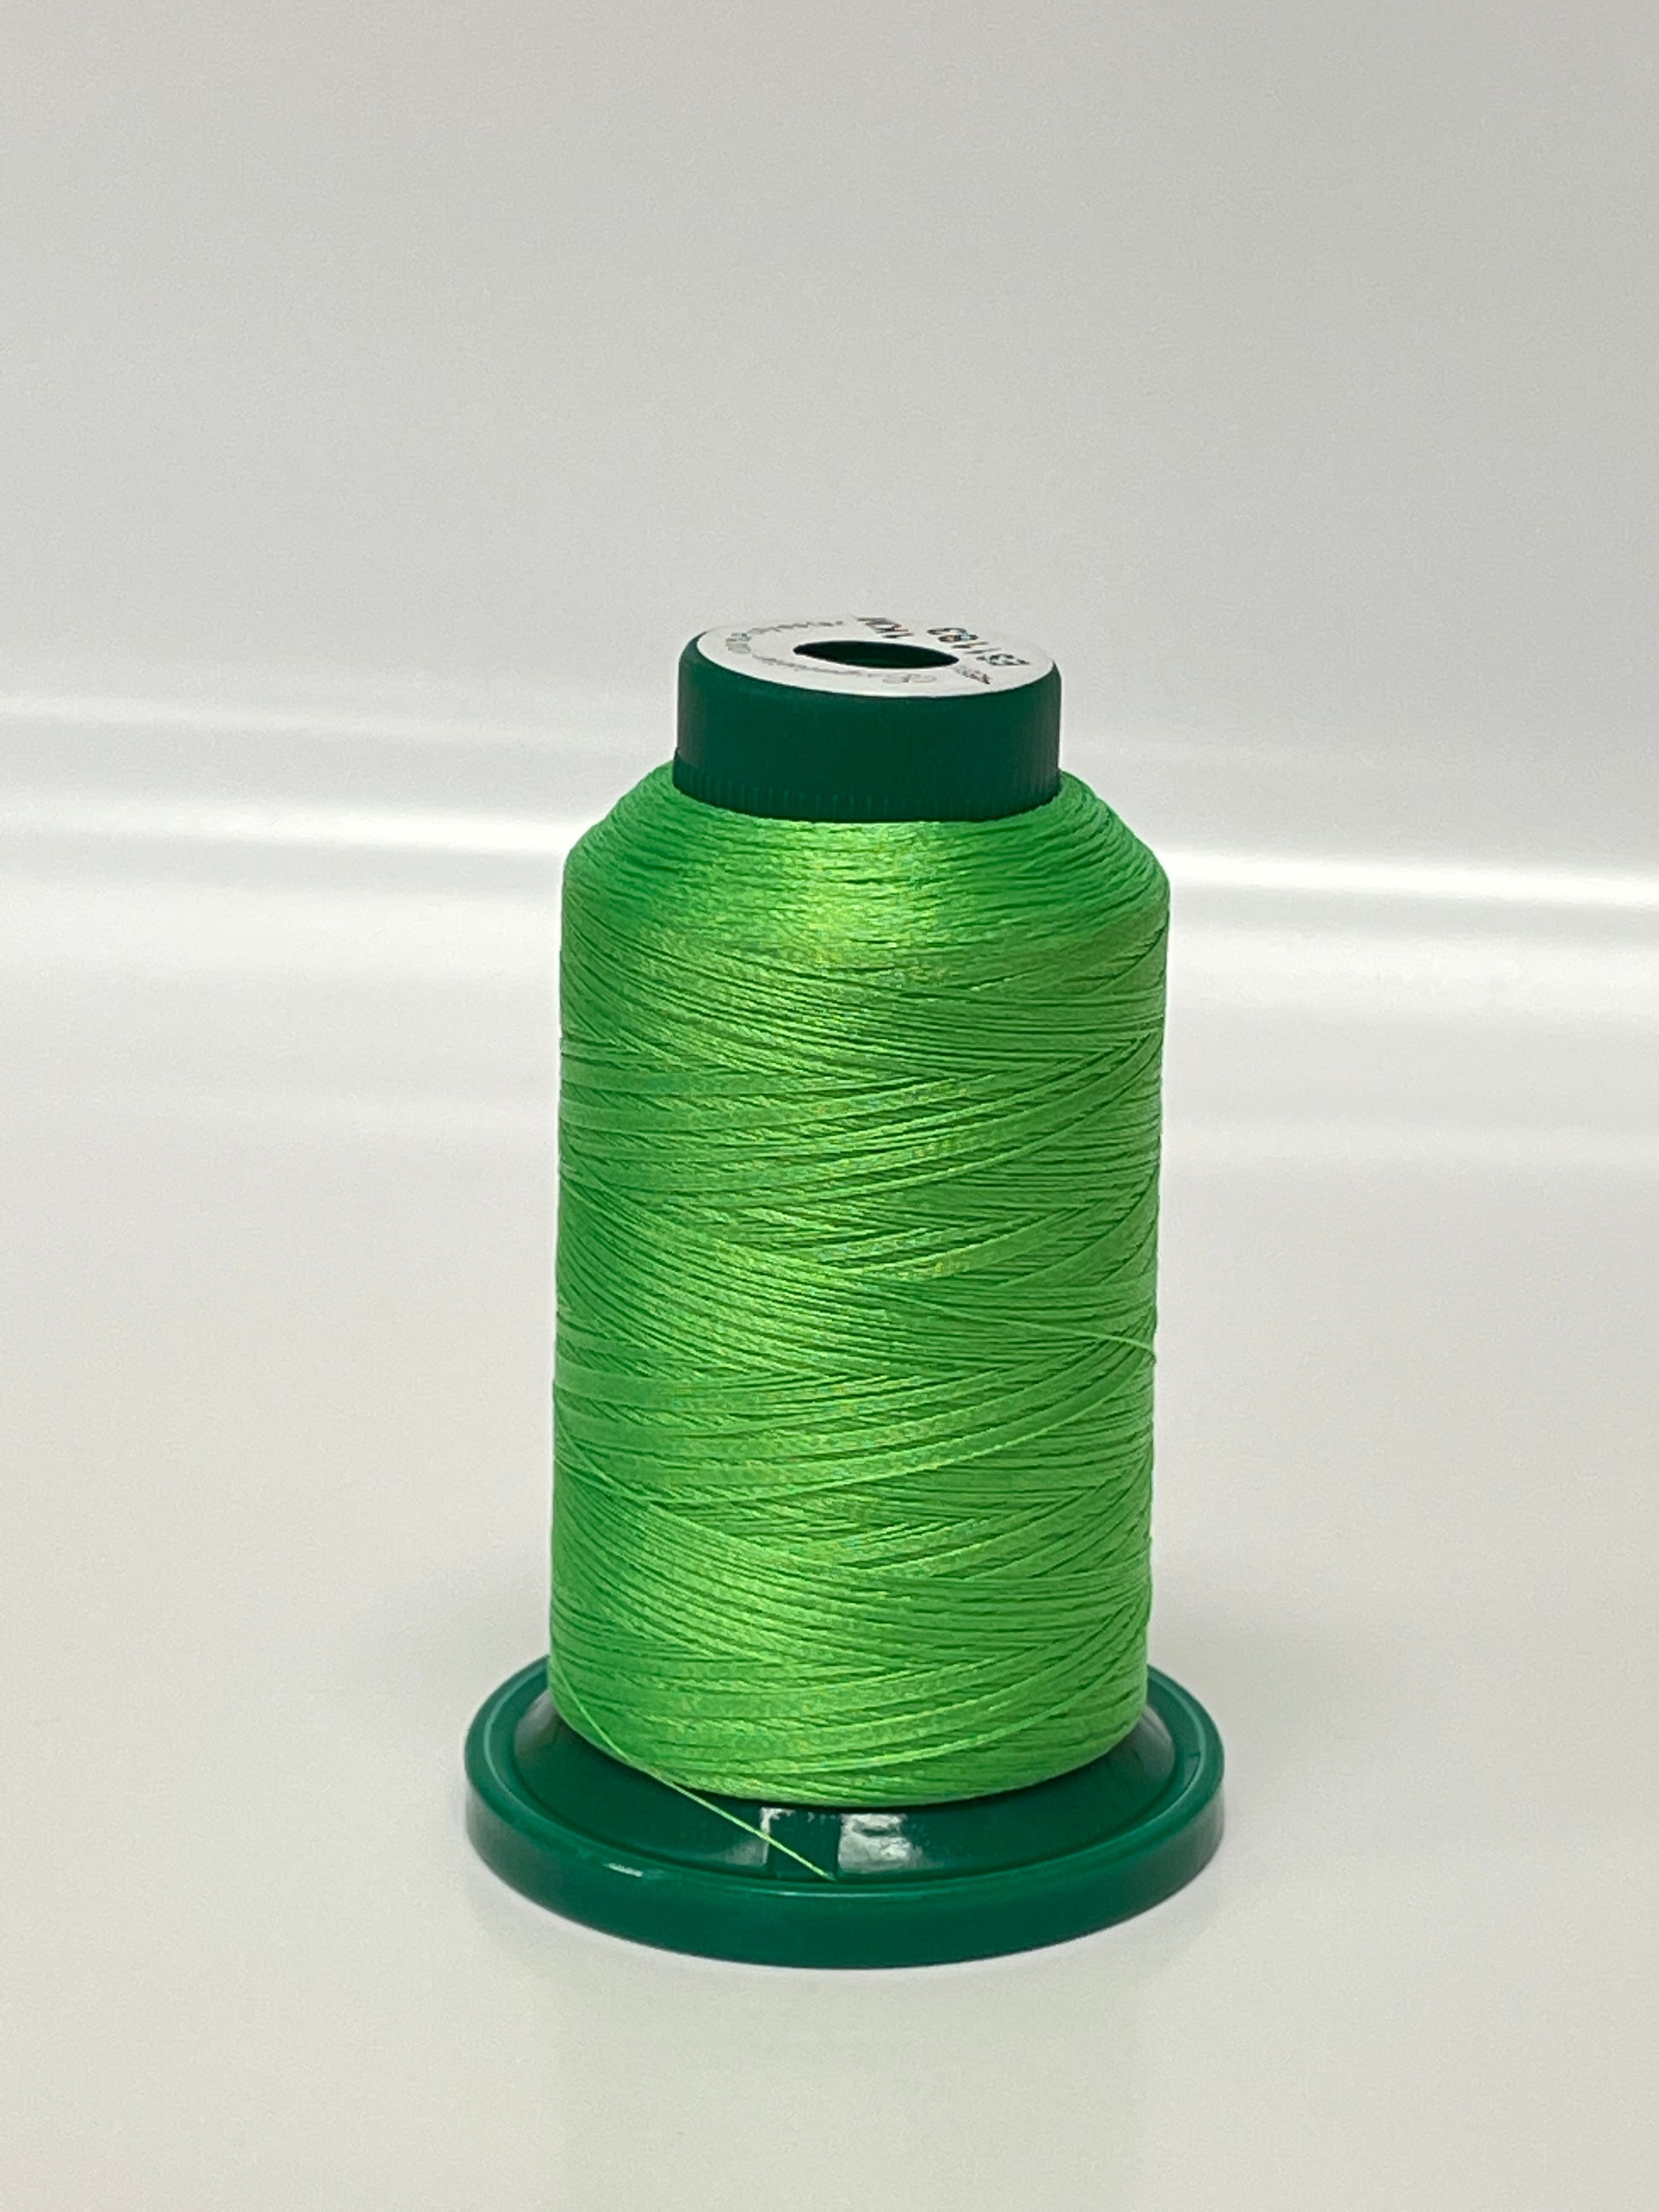 Leabu Exquisite Greens Threads Sewing – Center - Embroidery